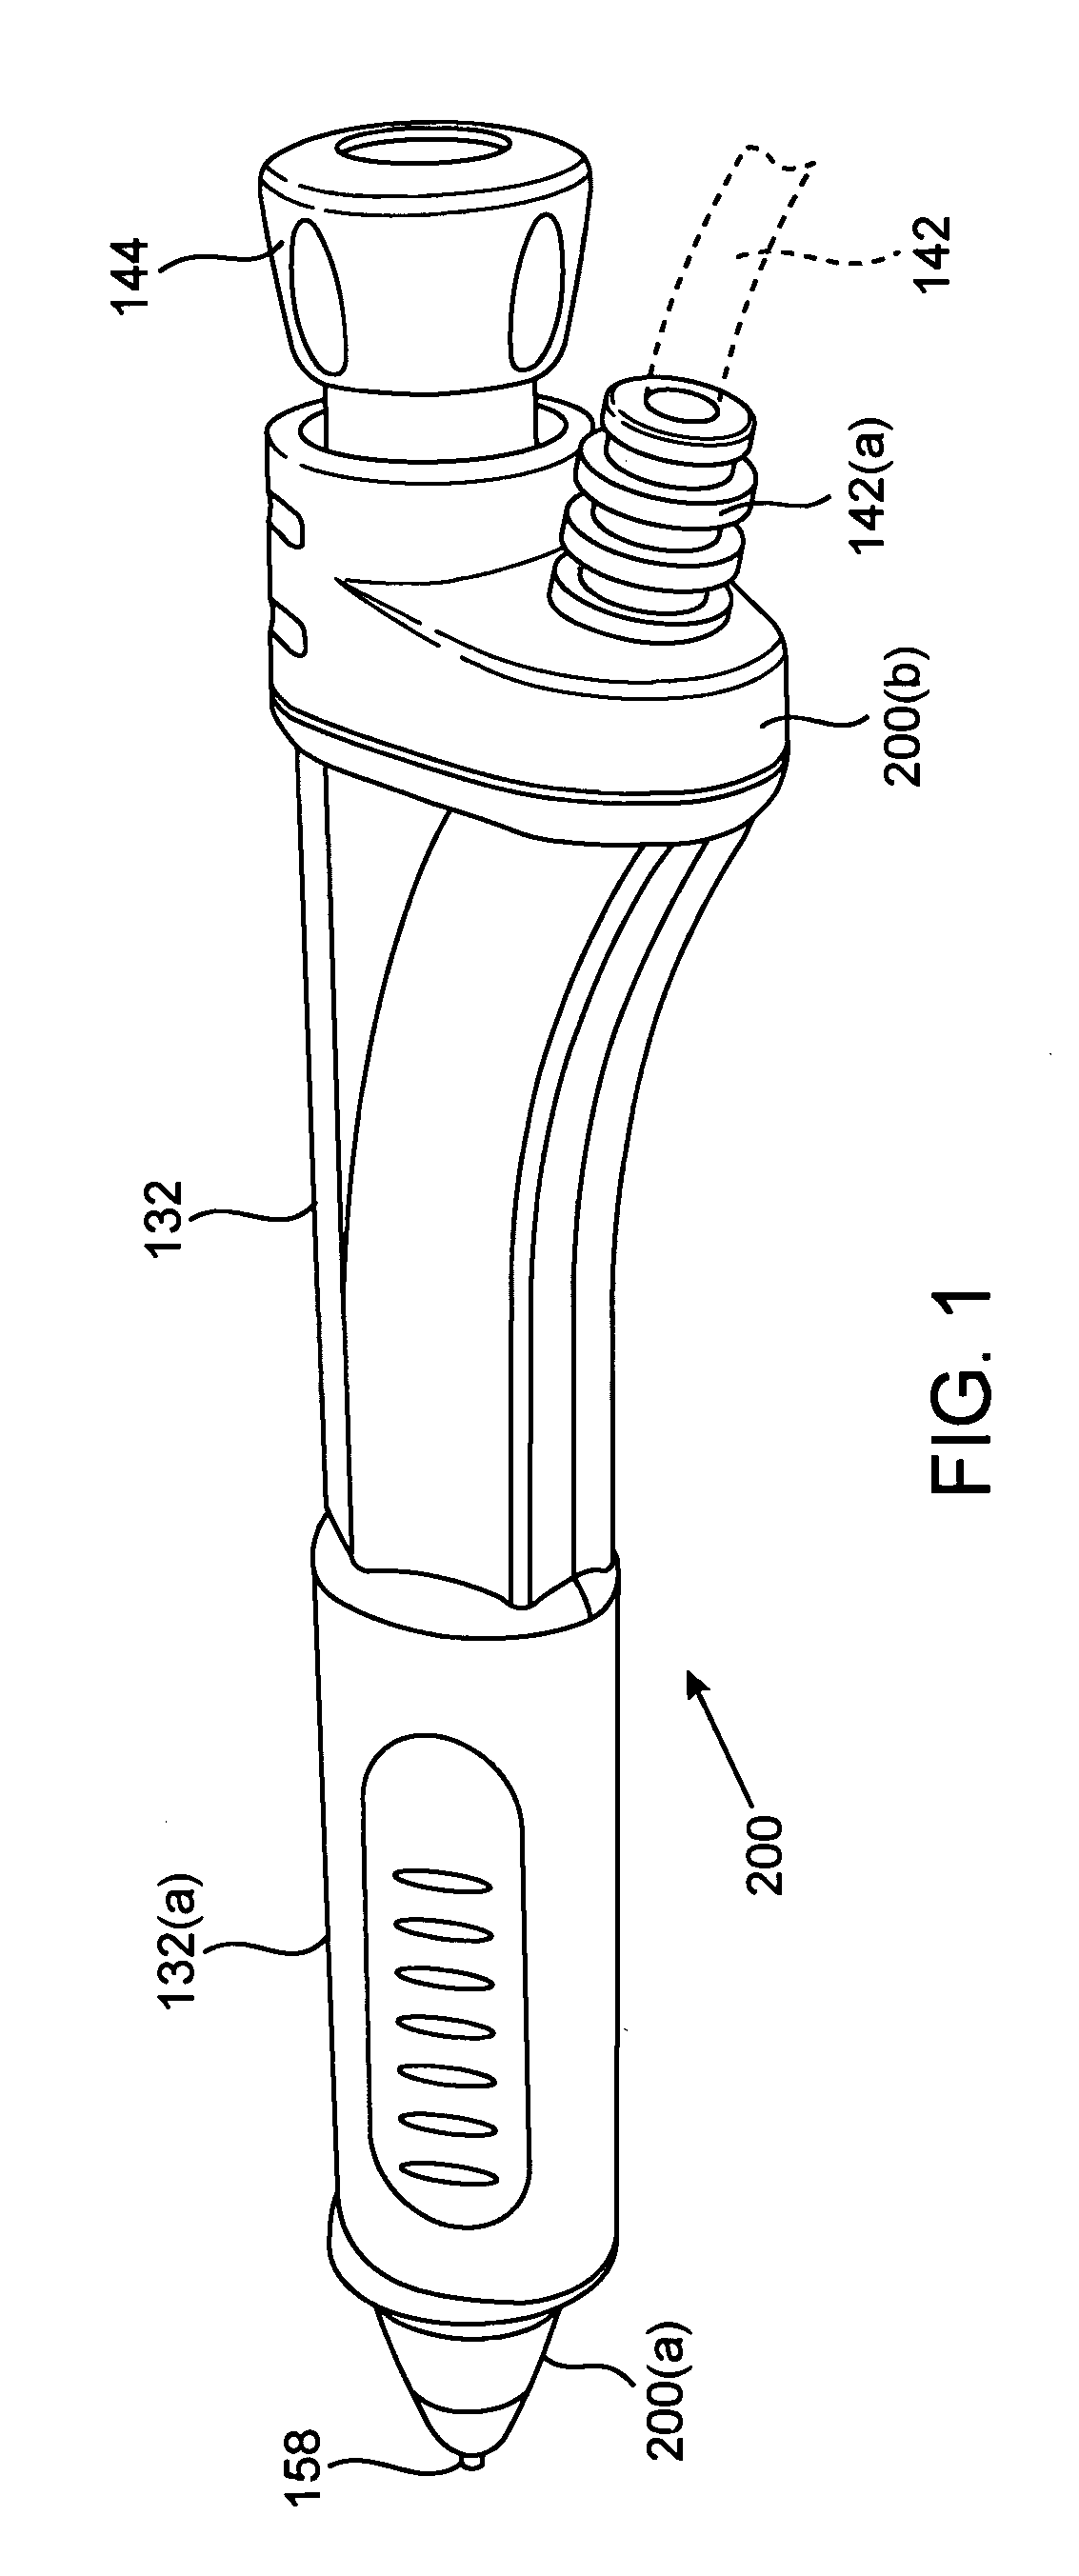 Writing stylus for electrographic position location apparatus